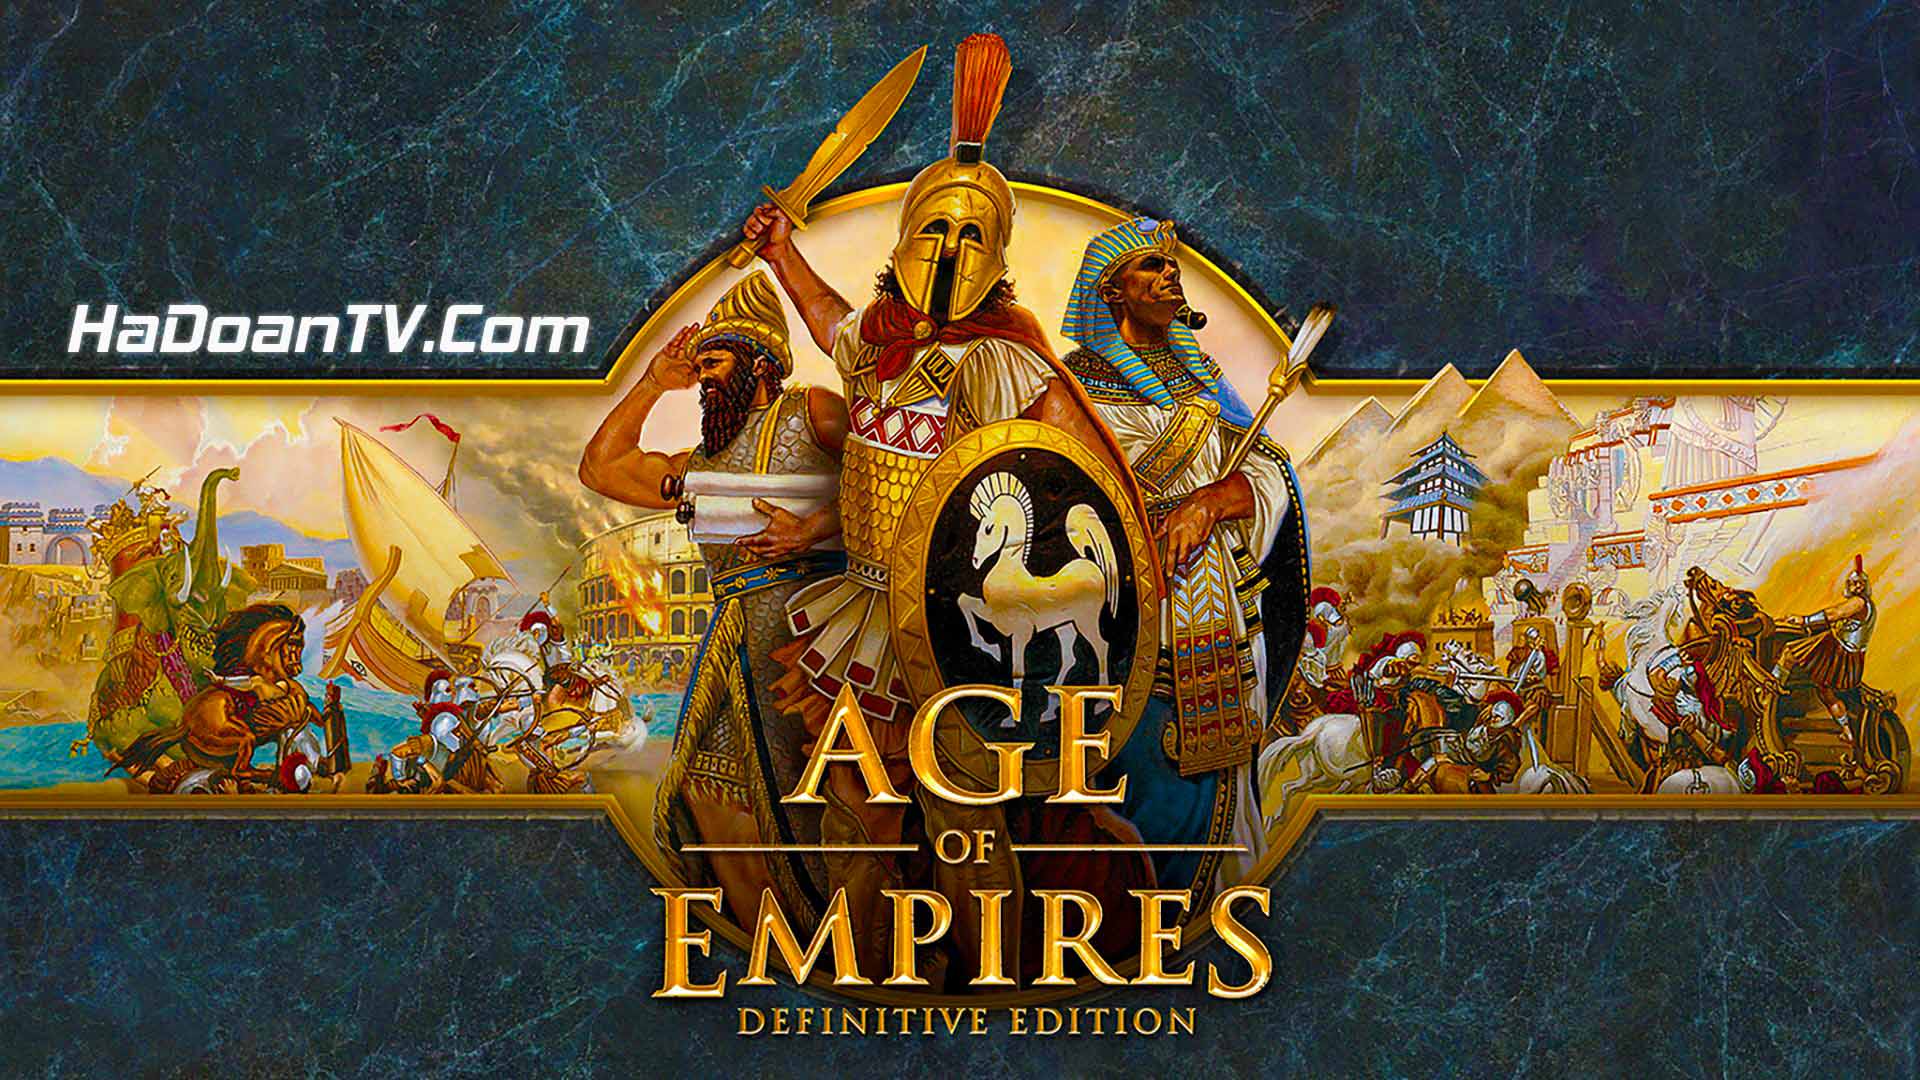 age of empires 4 download for windows in torrent